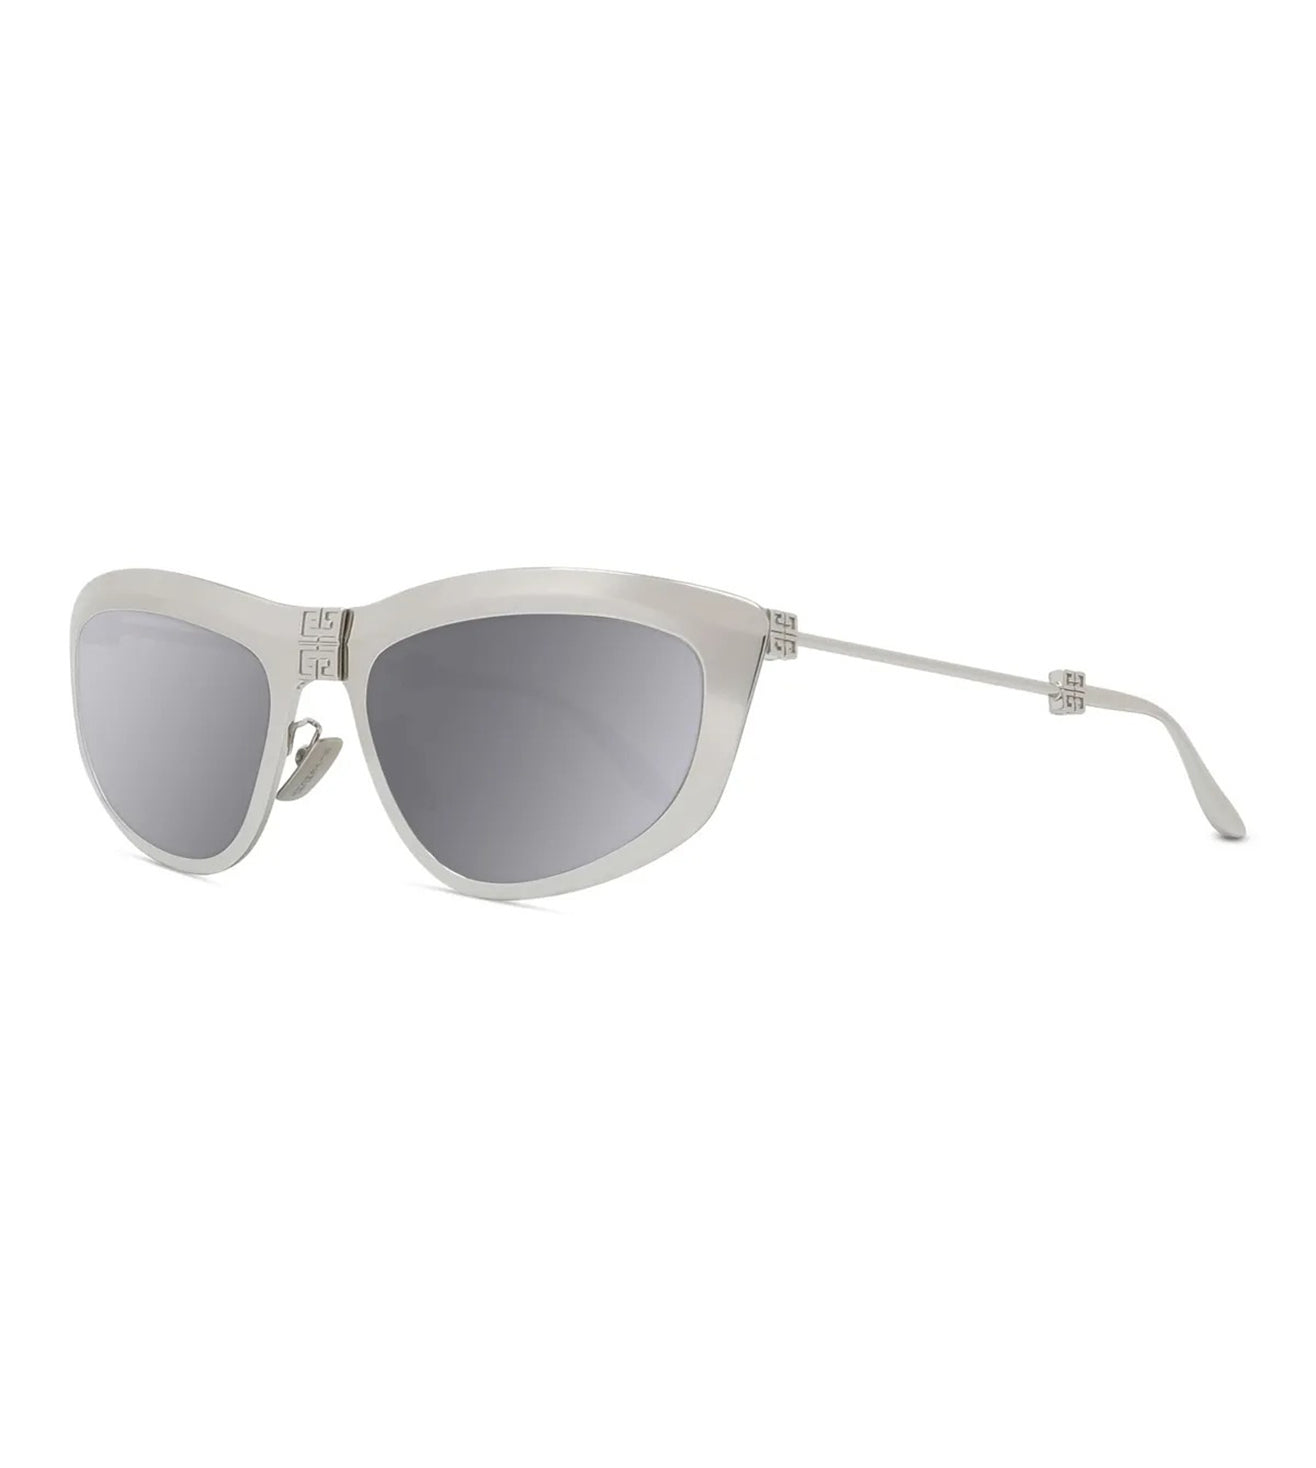 Givenchy Women's Smoke-mirrored Butterfly Sunglasses